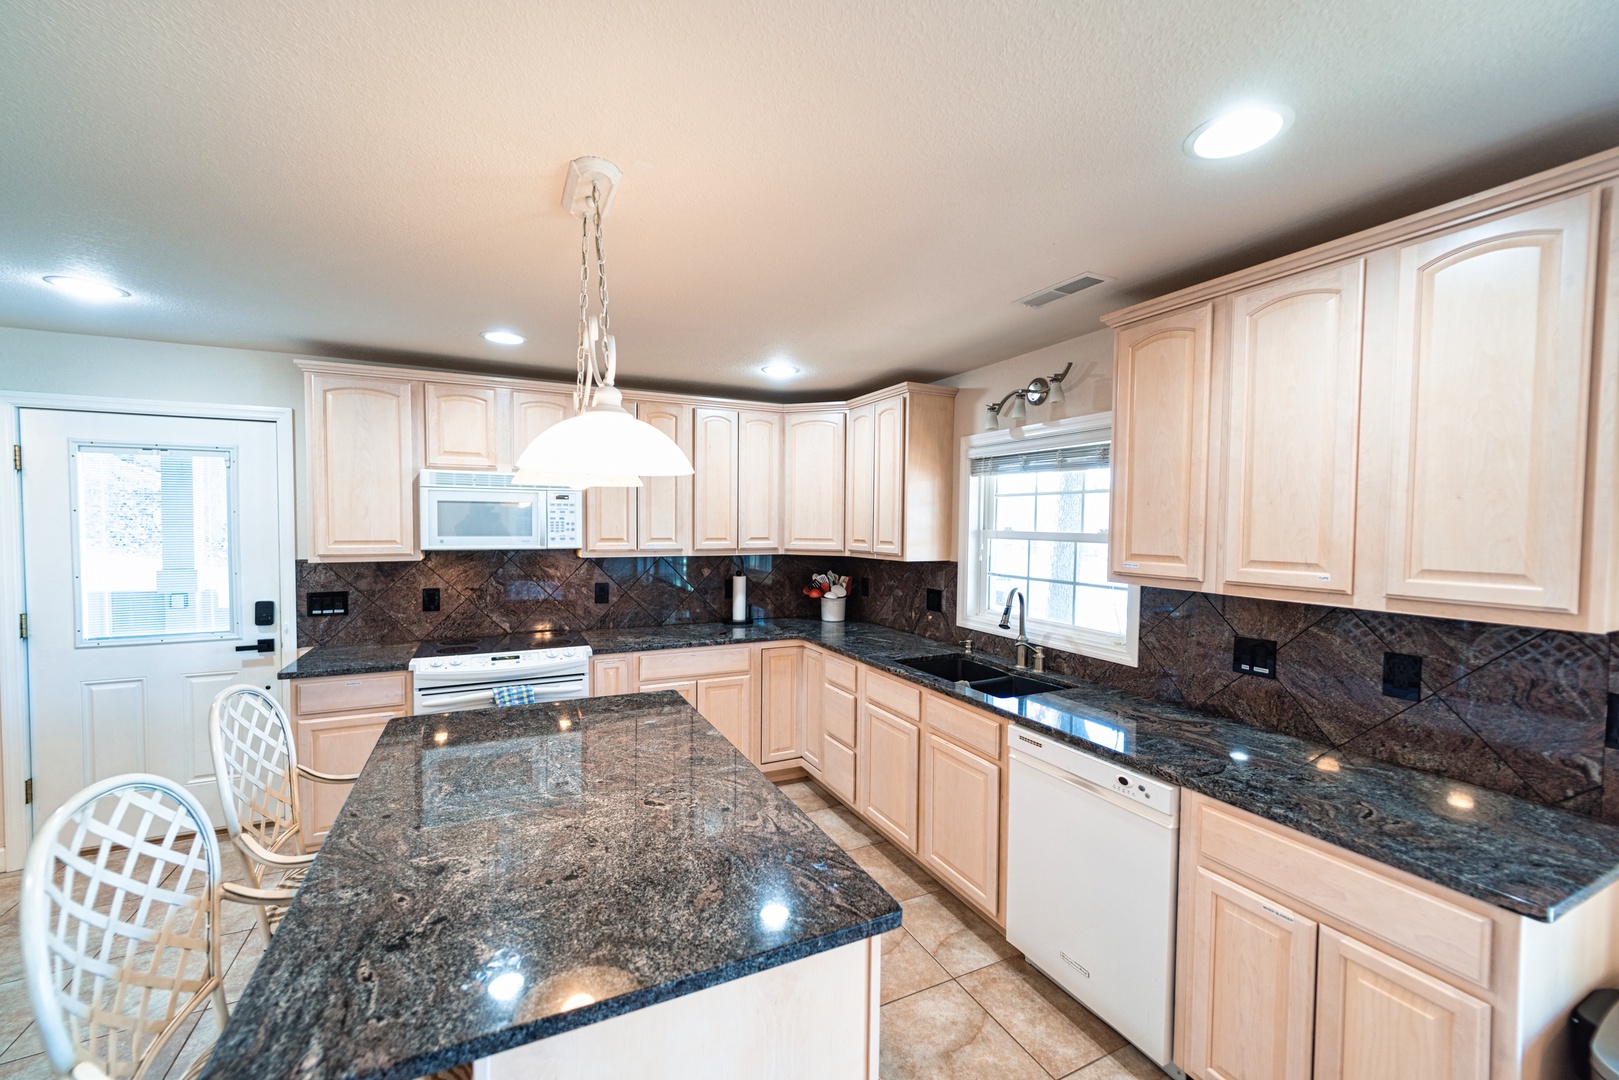 Downstairs, the open kitchen offers ample space & all the comforts of home